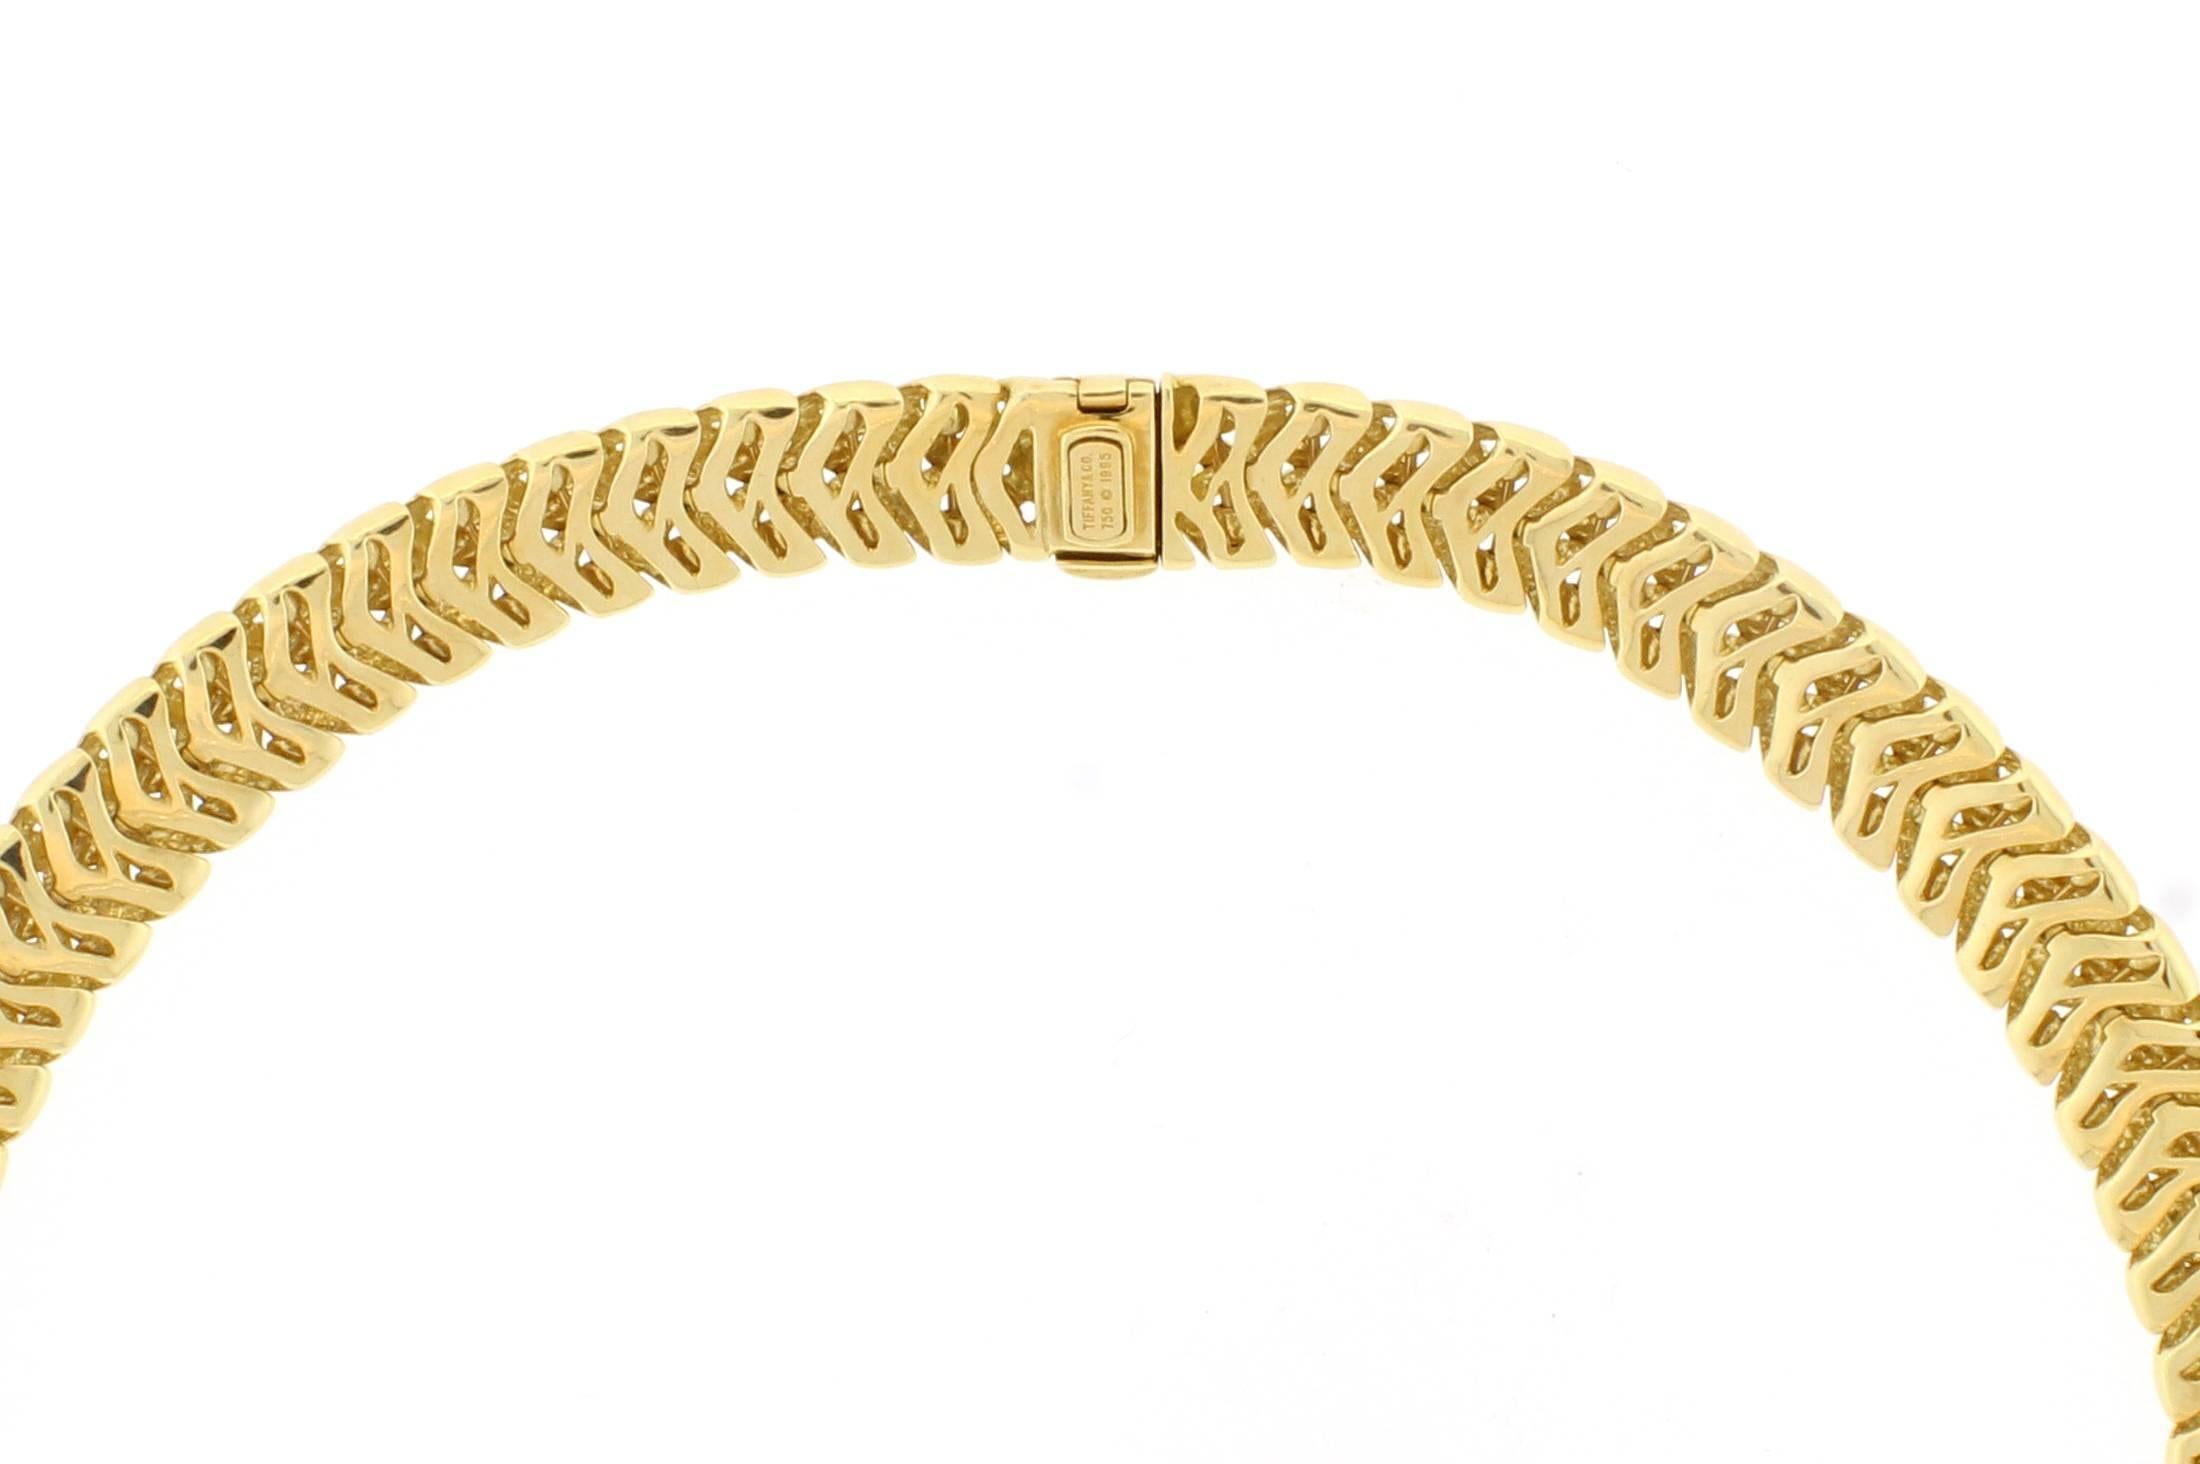 18 karat yellow gold and diamond “Vannerie” necklace by Tiffany & Co., dated 1995. The  necklace is comprised of  woven gold design measuring 1/2 inch wide, the front section is set with 2 diamond buckle sections, each containing 18  brilliant